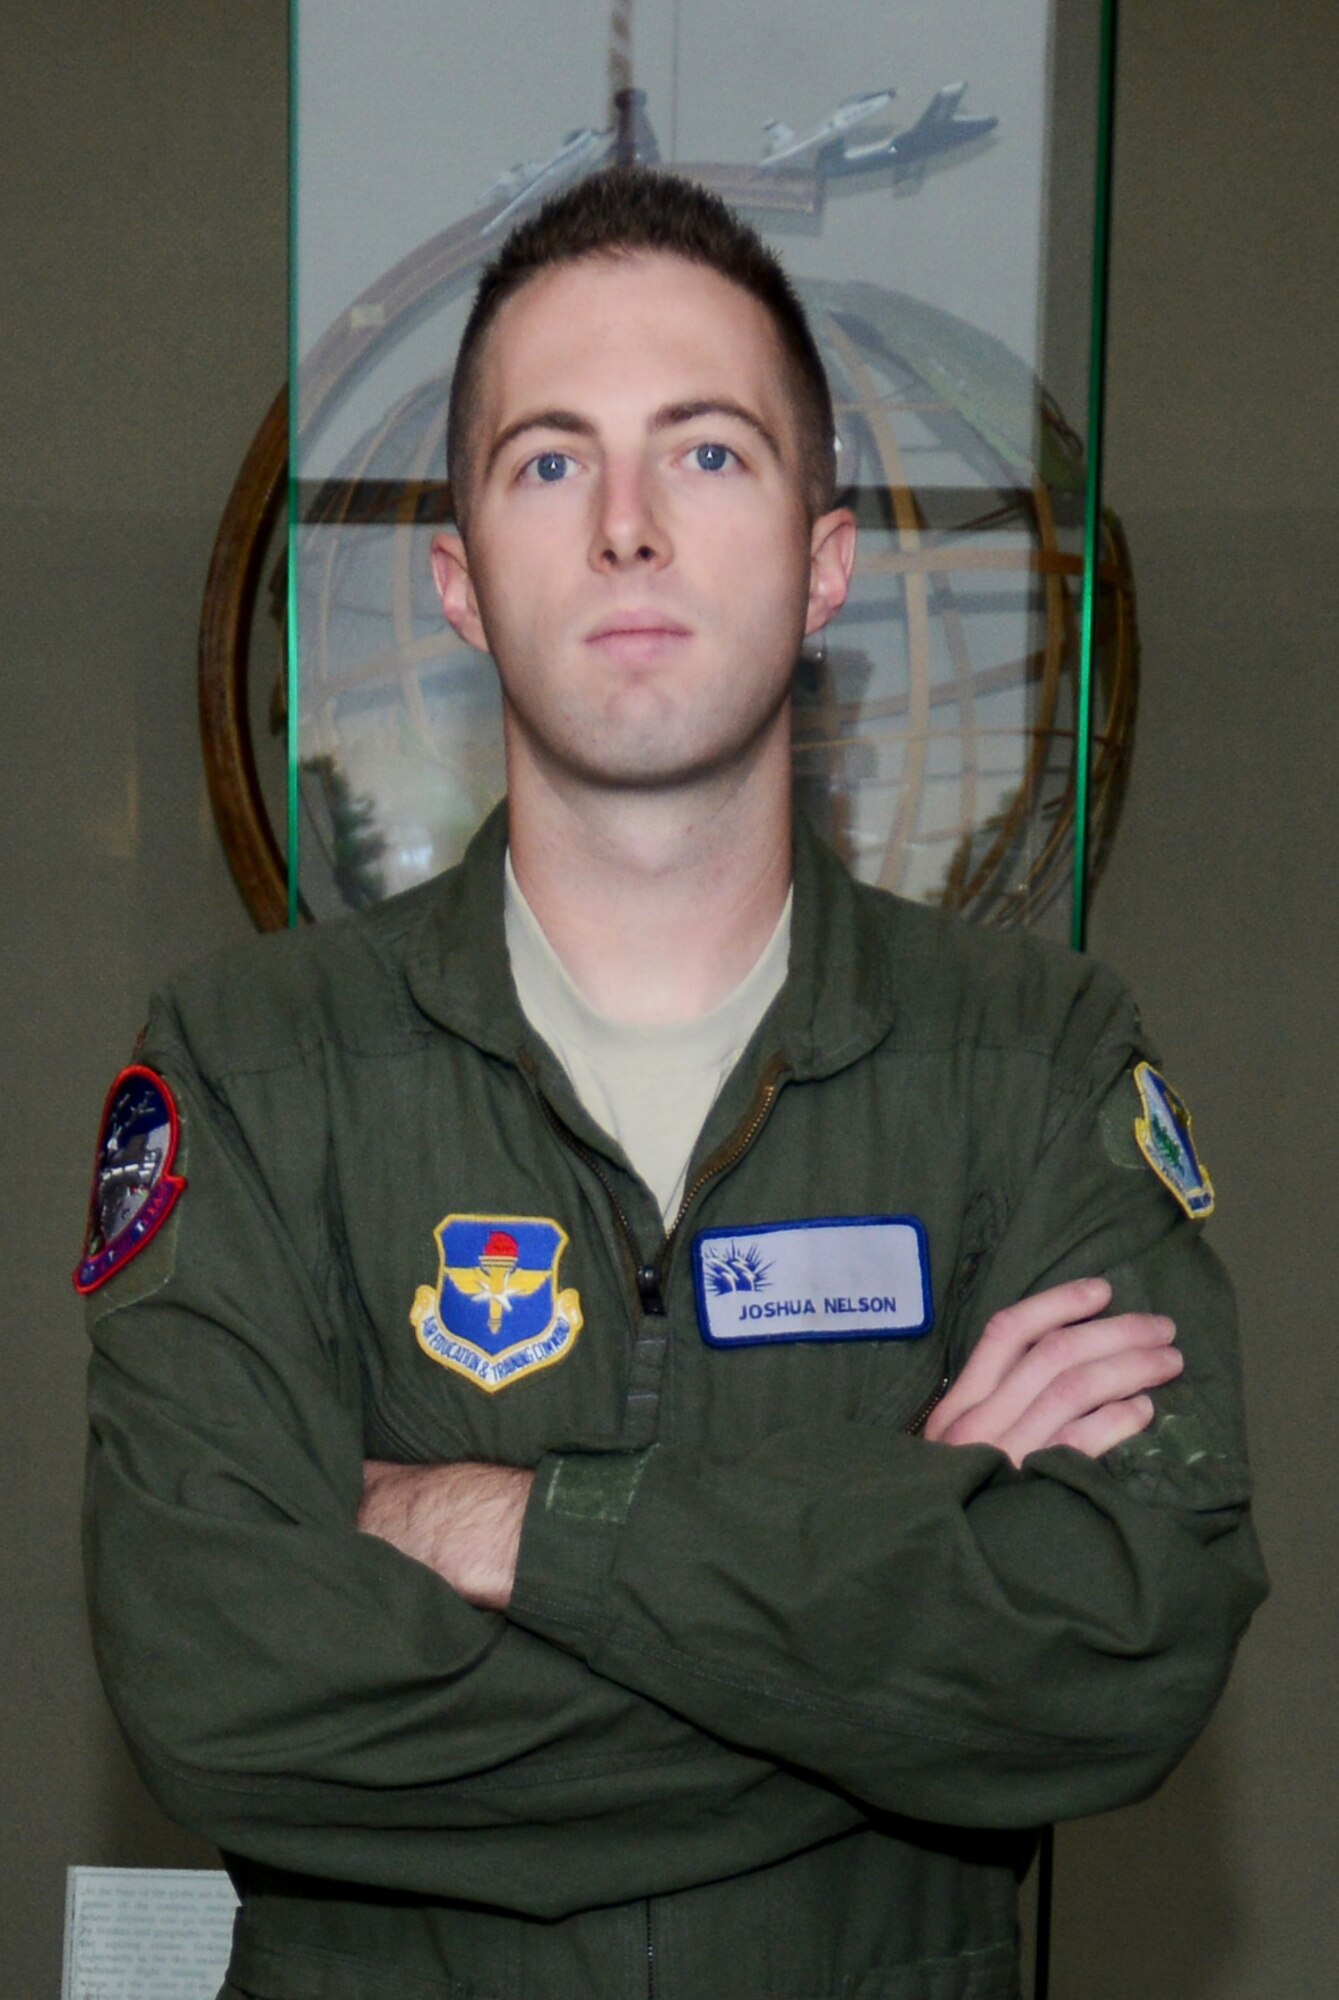 2nd Lt. Joshua Nelson poses for a portrait at the 47th Flying Training Wing headquarters on Oct. 23, 2014. Nelson was credited for stopping a potential murder, then stopping a potential suicide, during a trip to Walmart.(U.S. Air Force photo by Staff Sgt. Steven R. Doty)